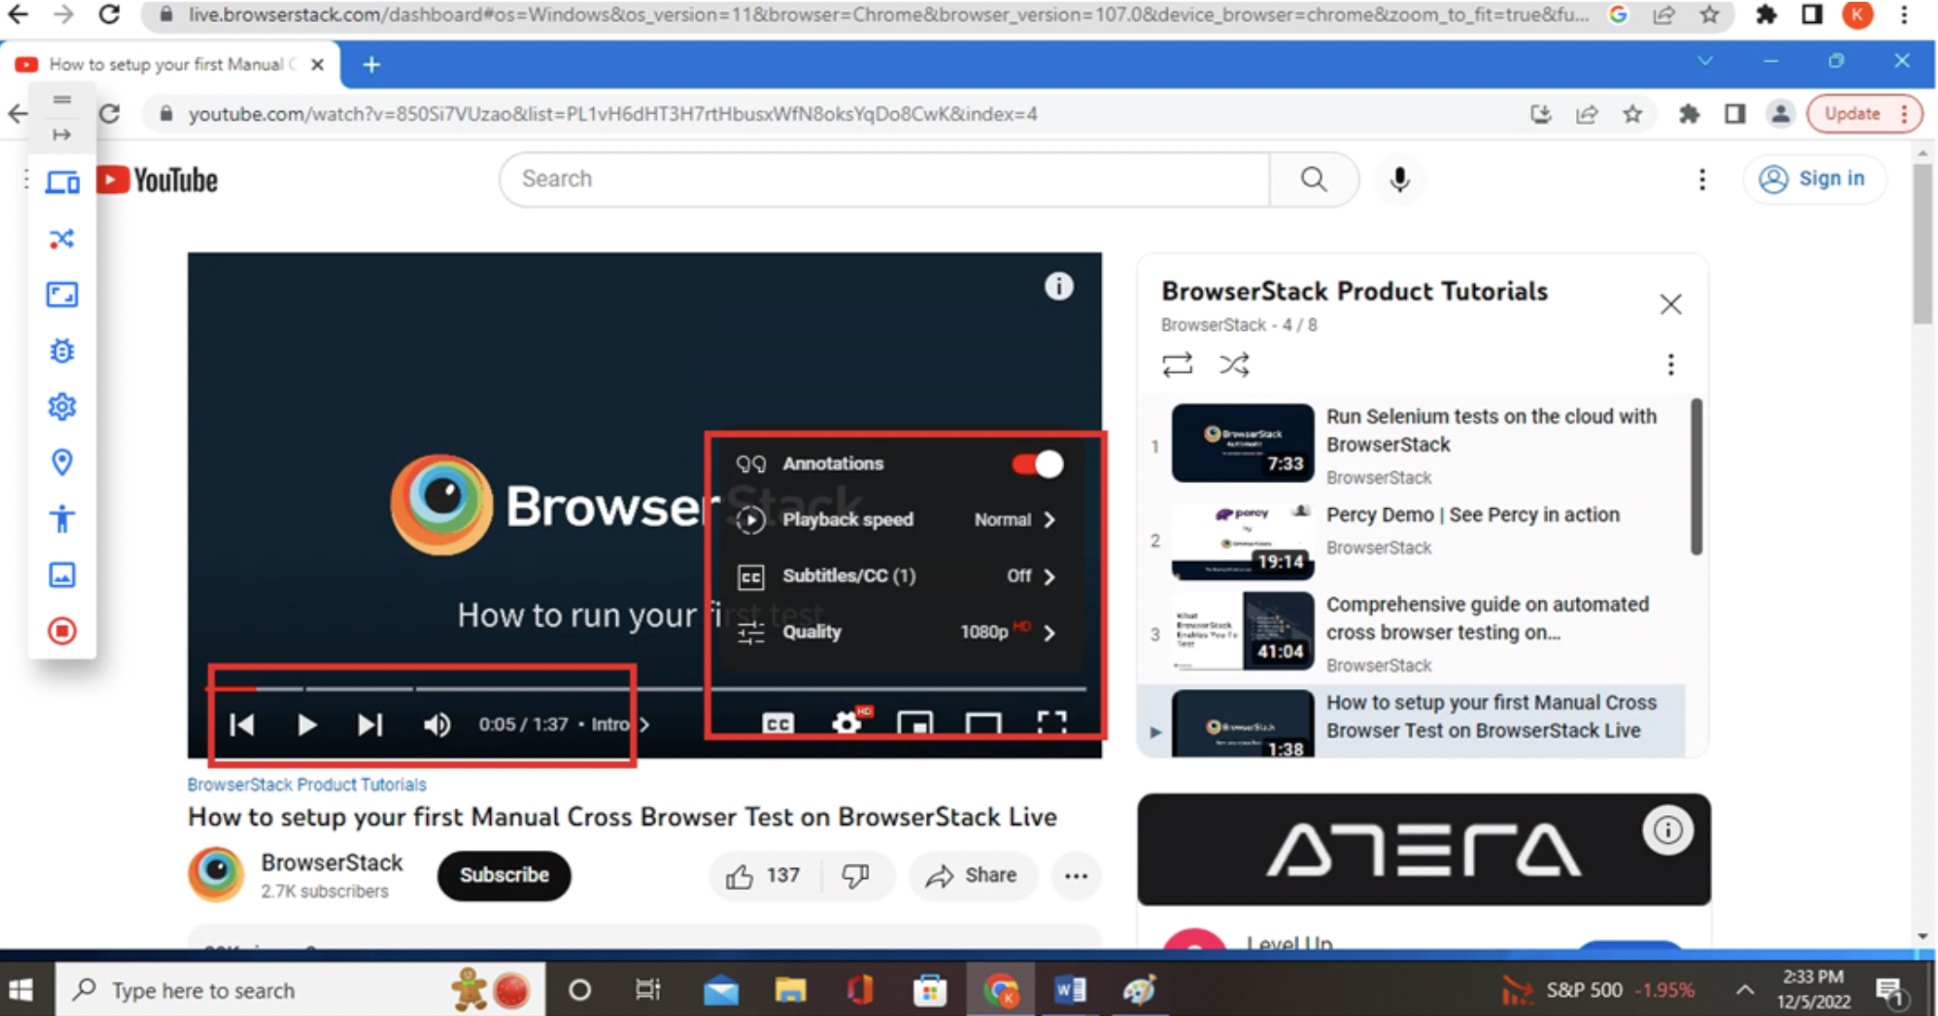 Video Testing using BrowserStack Live on Windows11 Chrome107 browser